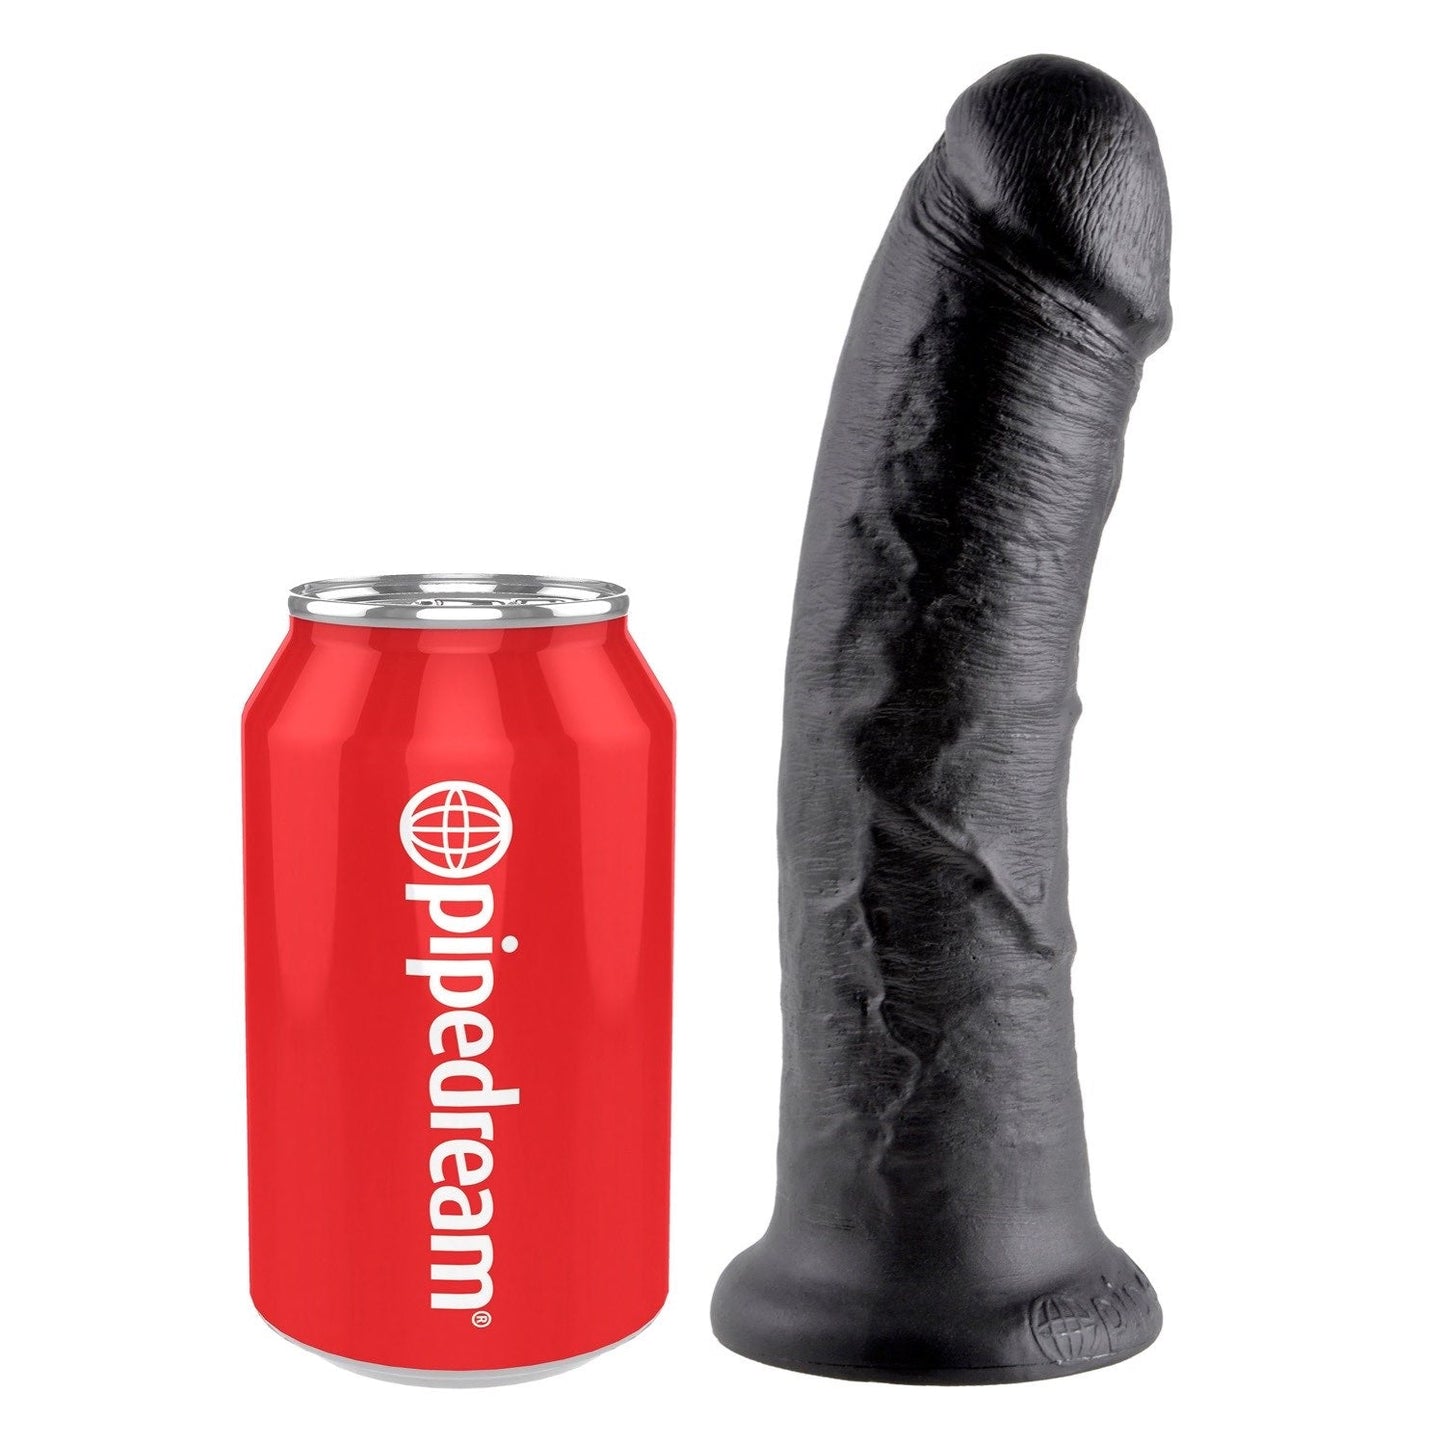 8" Cock - Black 20.3 cm (8") Dong